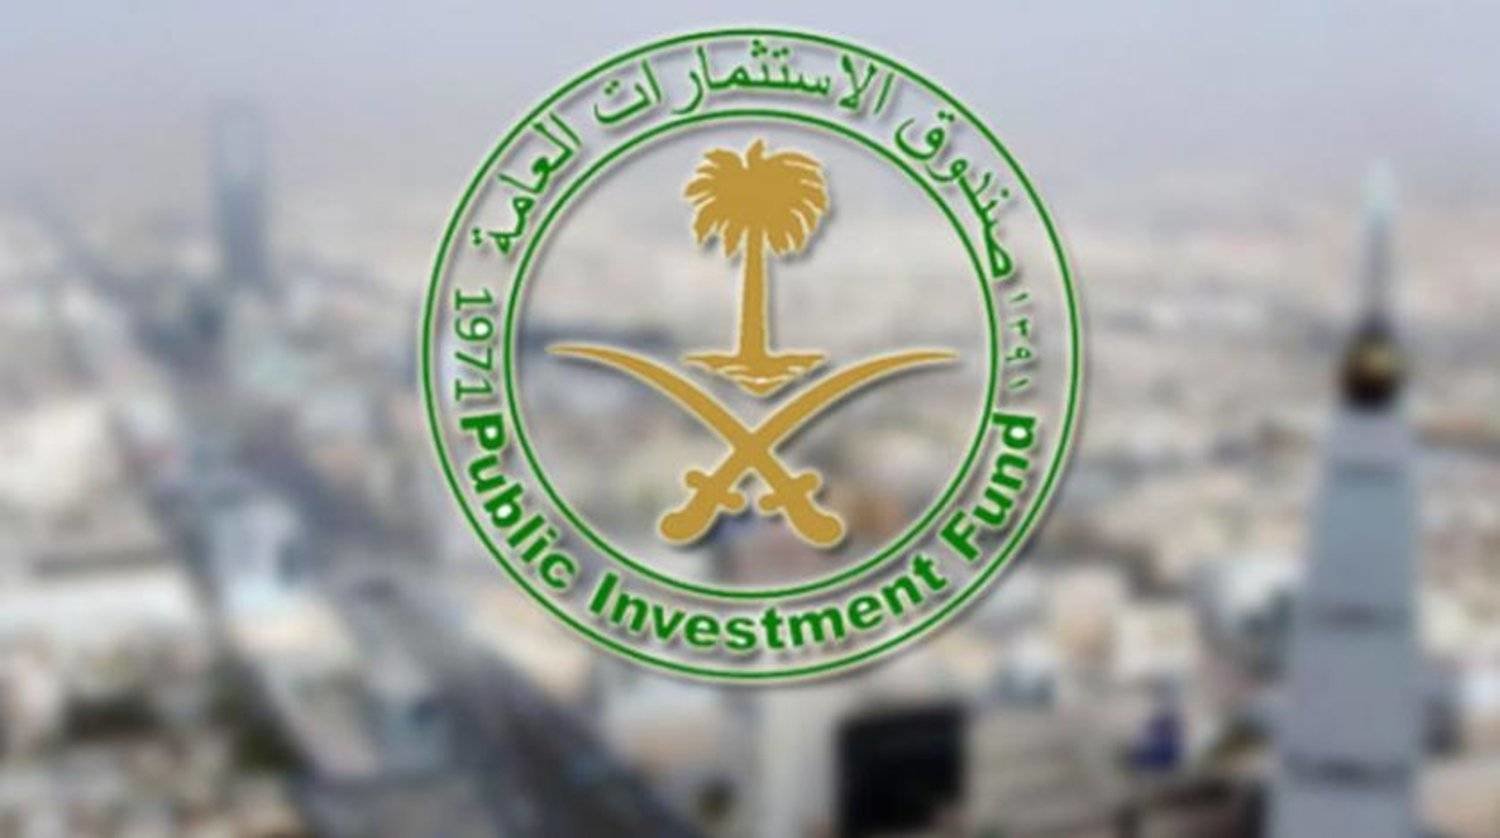 PIF said it signed a share subscription agreement to invest in Tamimi Markets.